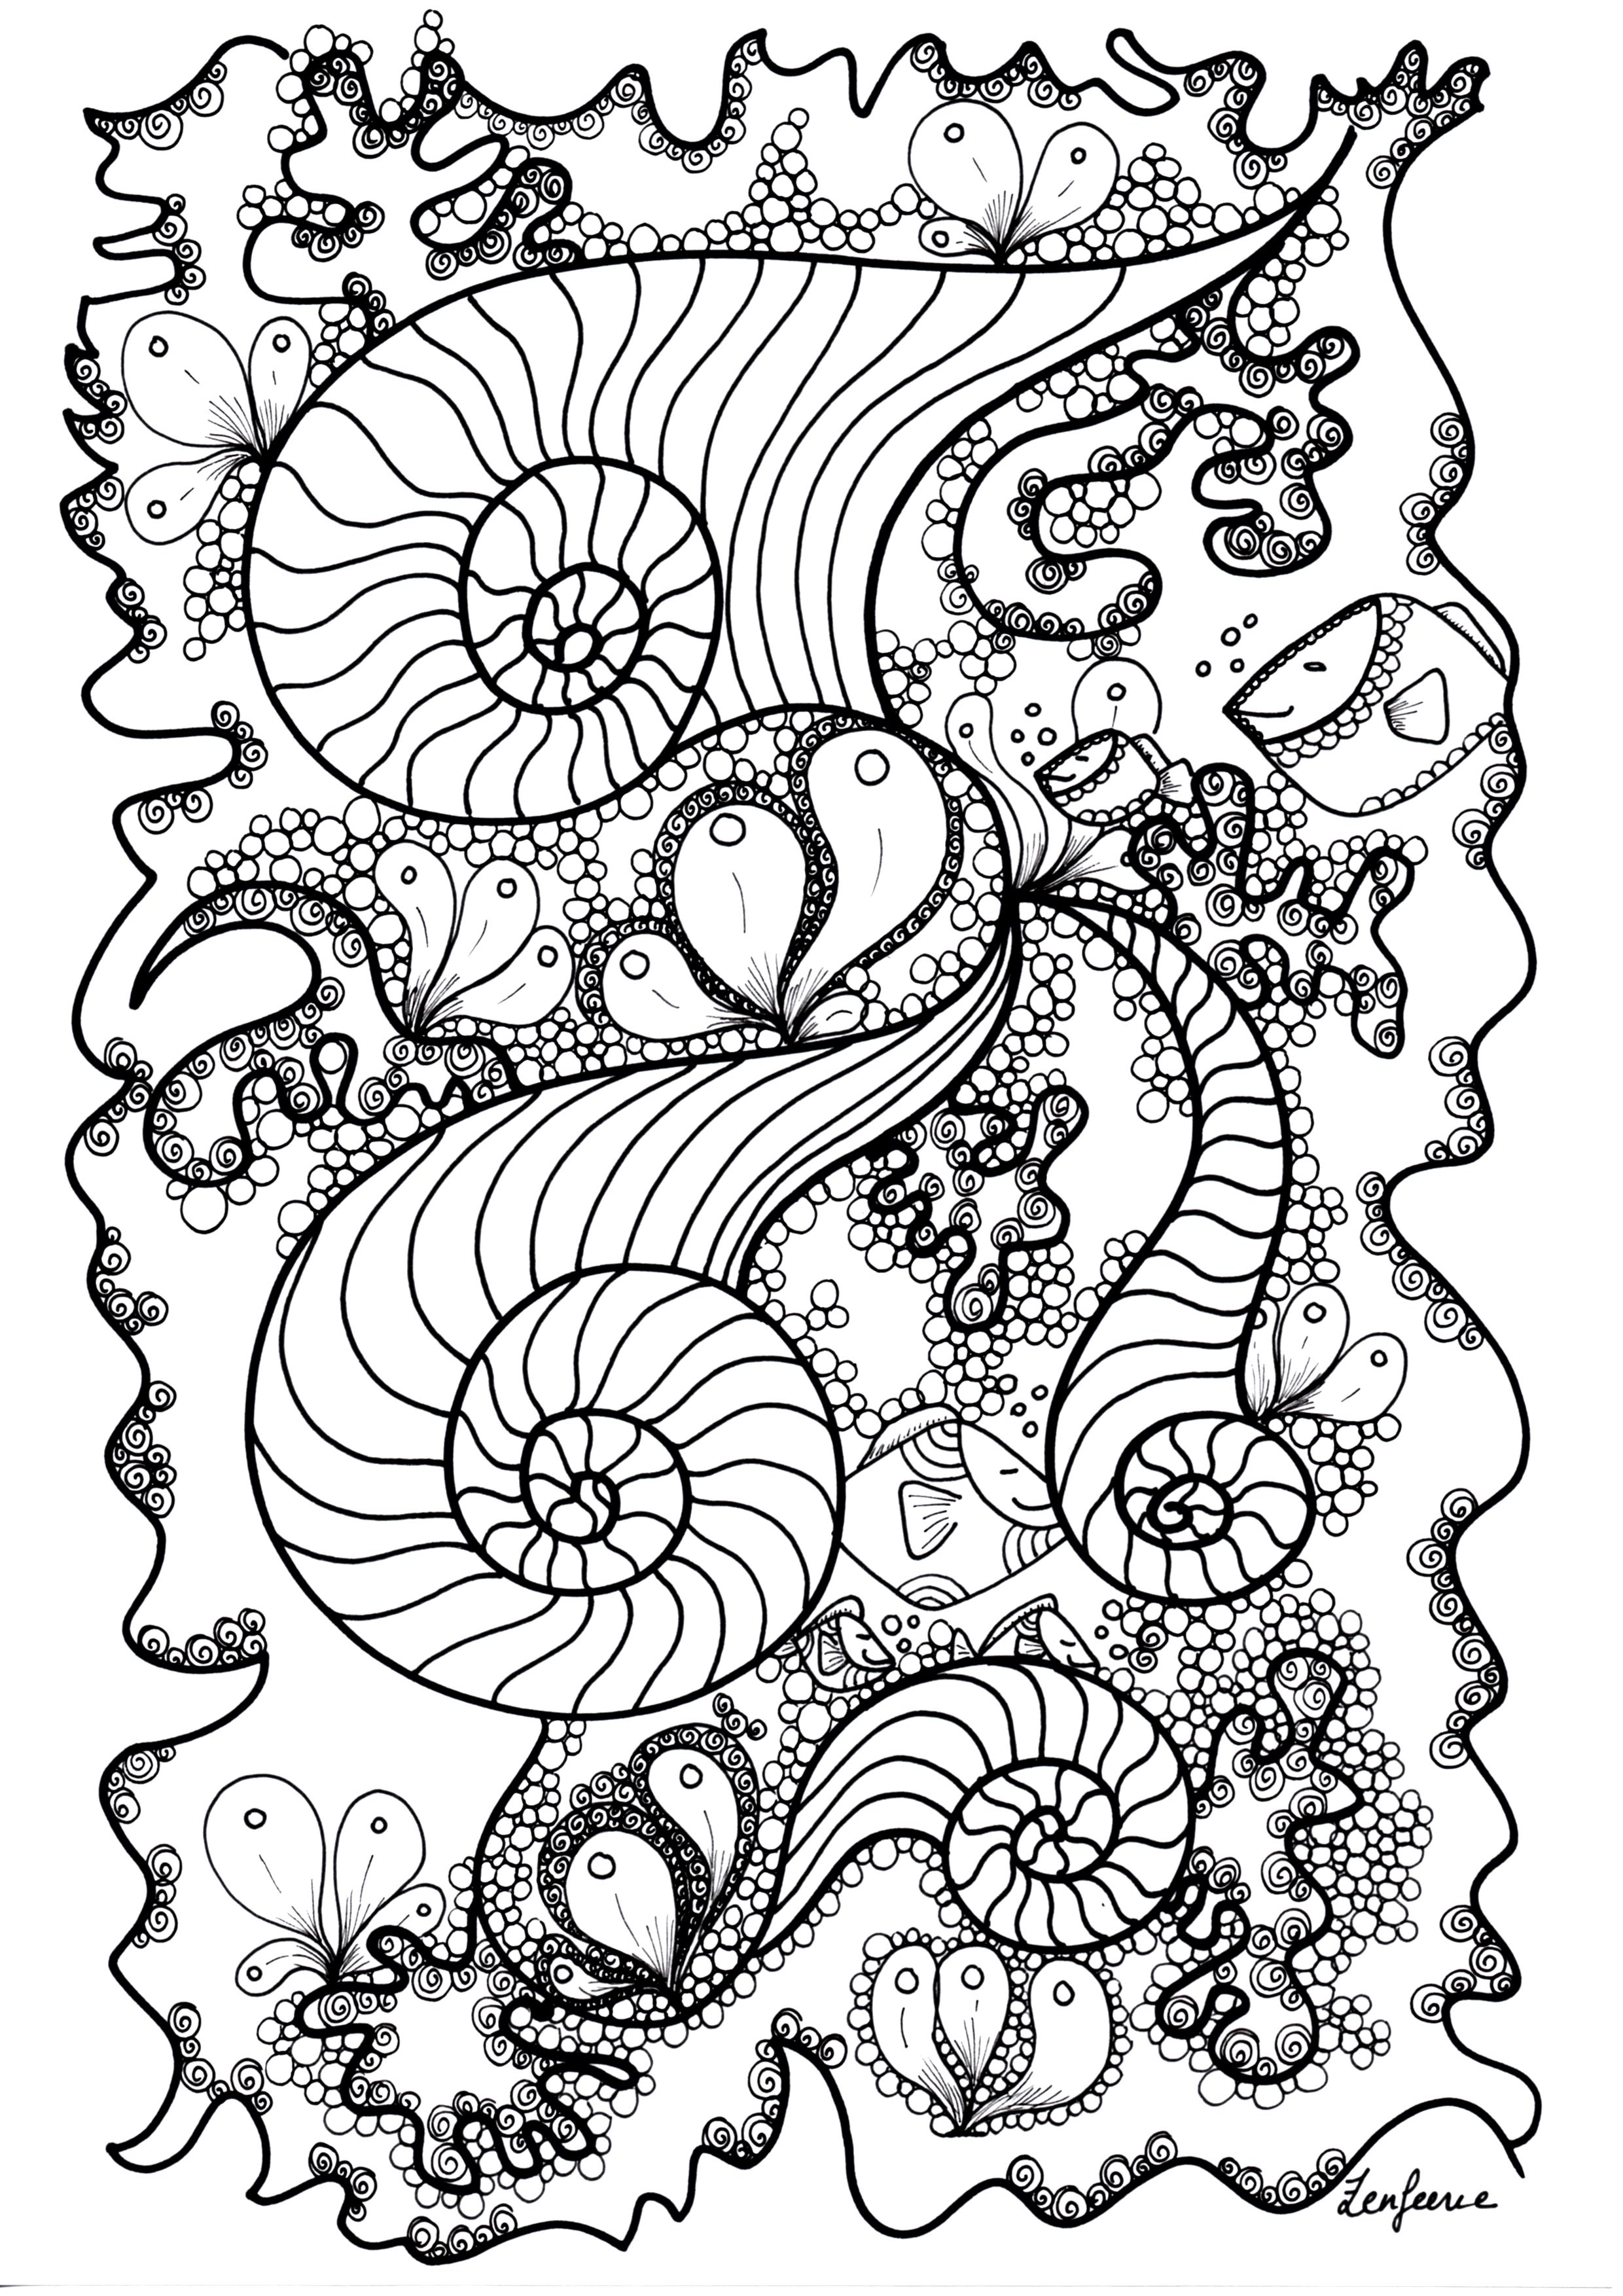 Zentangle to print   Zentangle Kids Coloring Pages